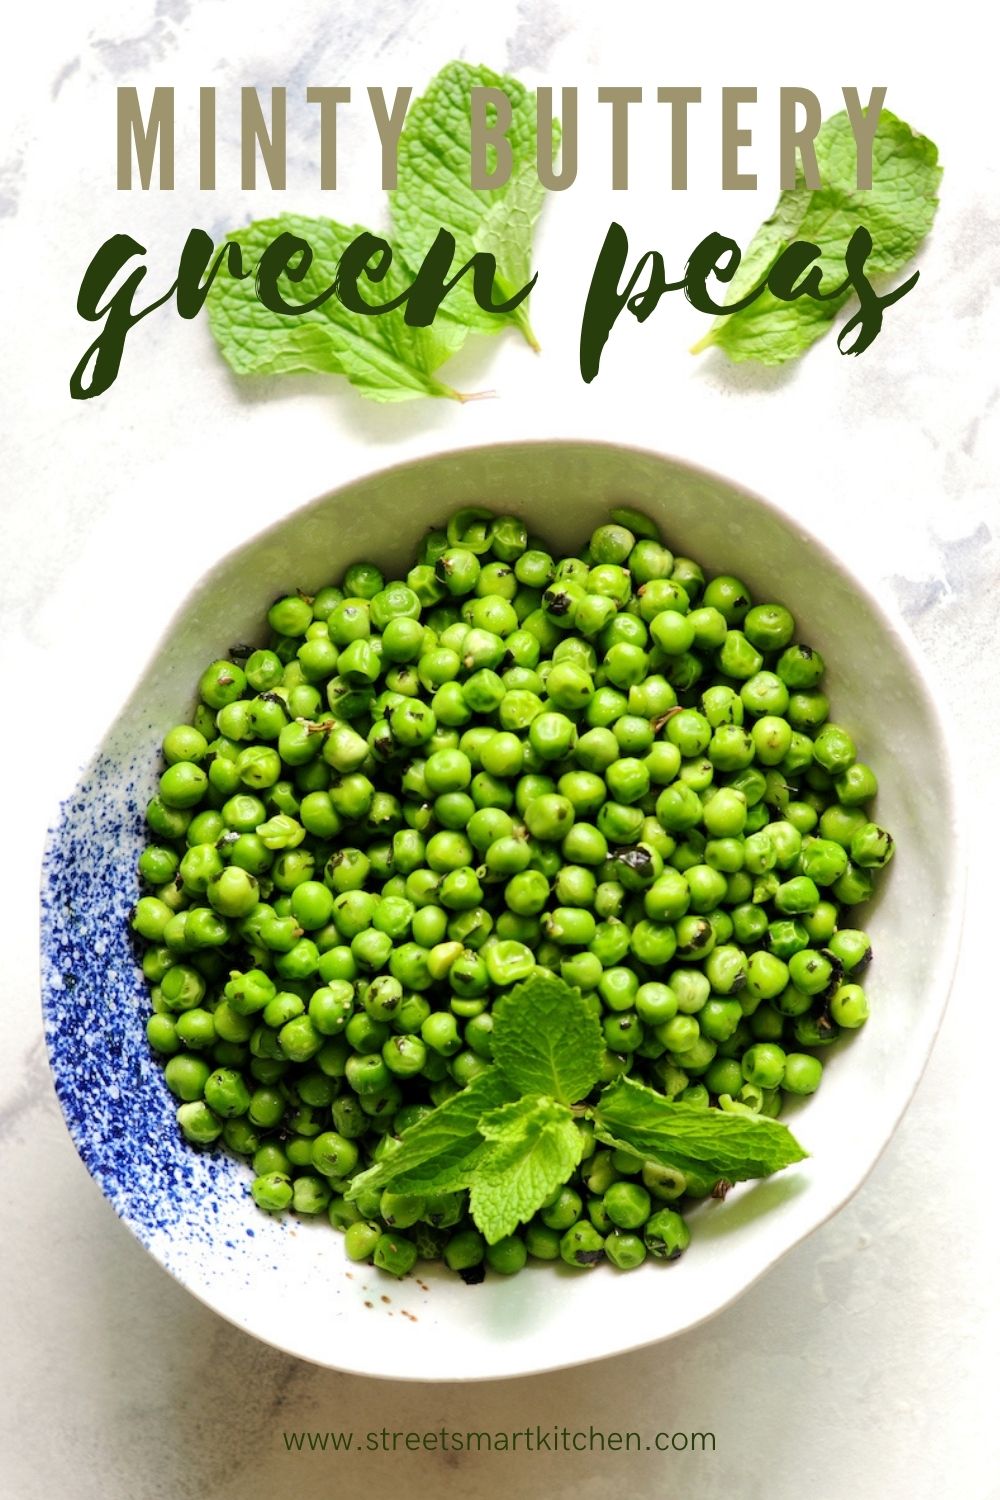 This minty and buttery green peas recipe makes your frozen peas taste so much better! 6 ingredients and 10 minutes are all you need.